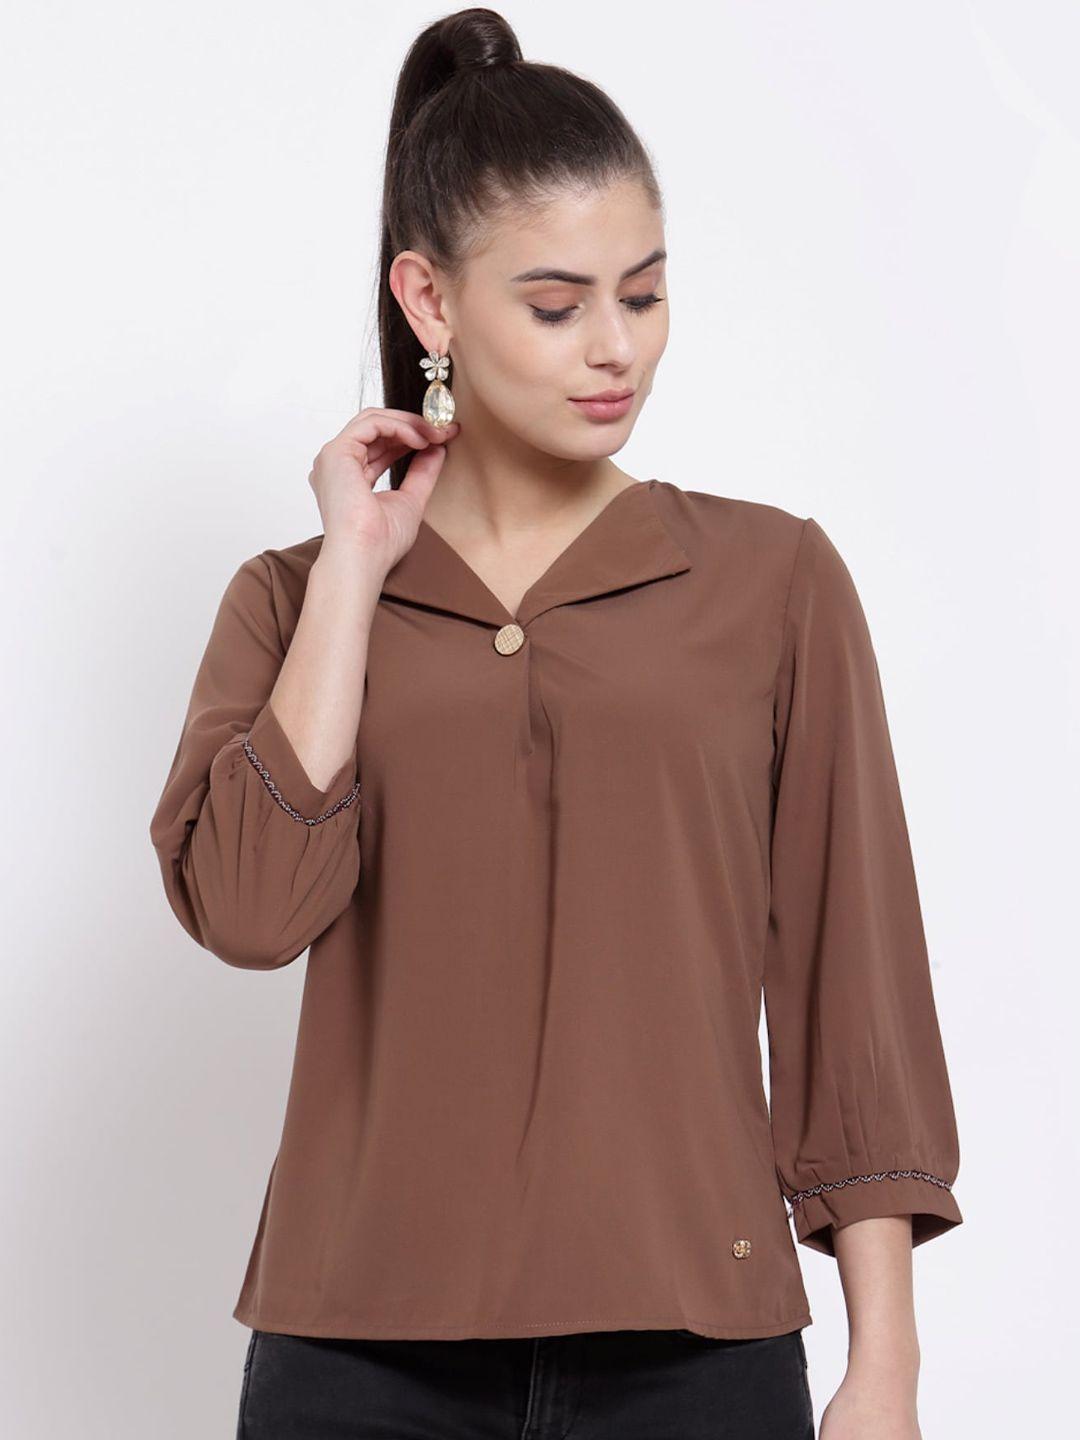 juelle solid shirt style top